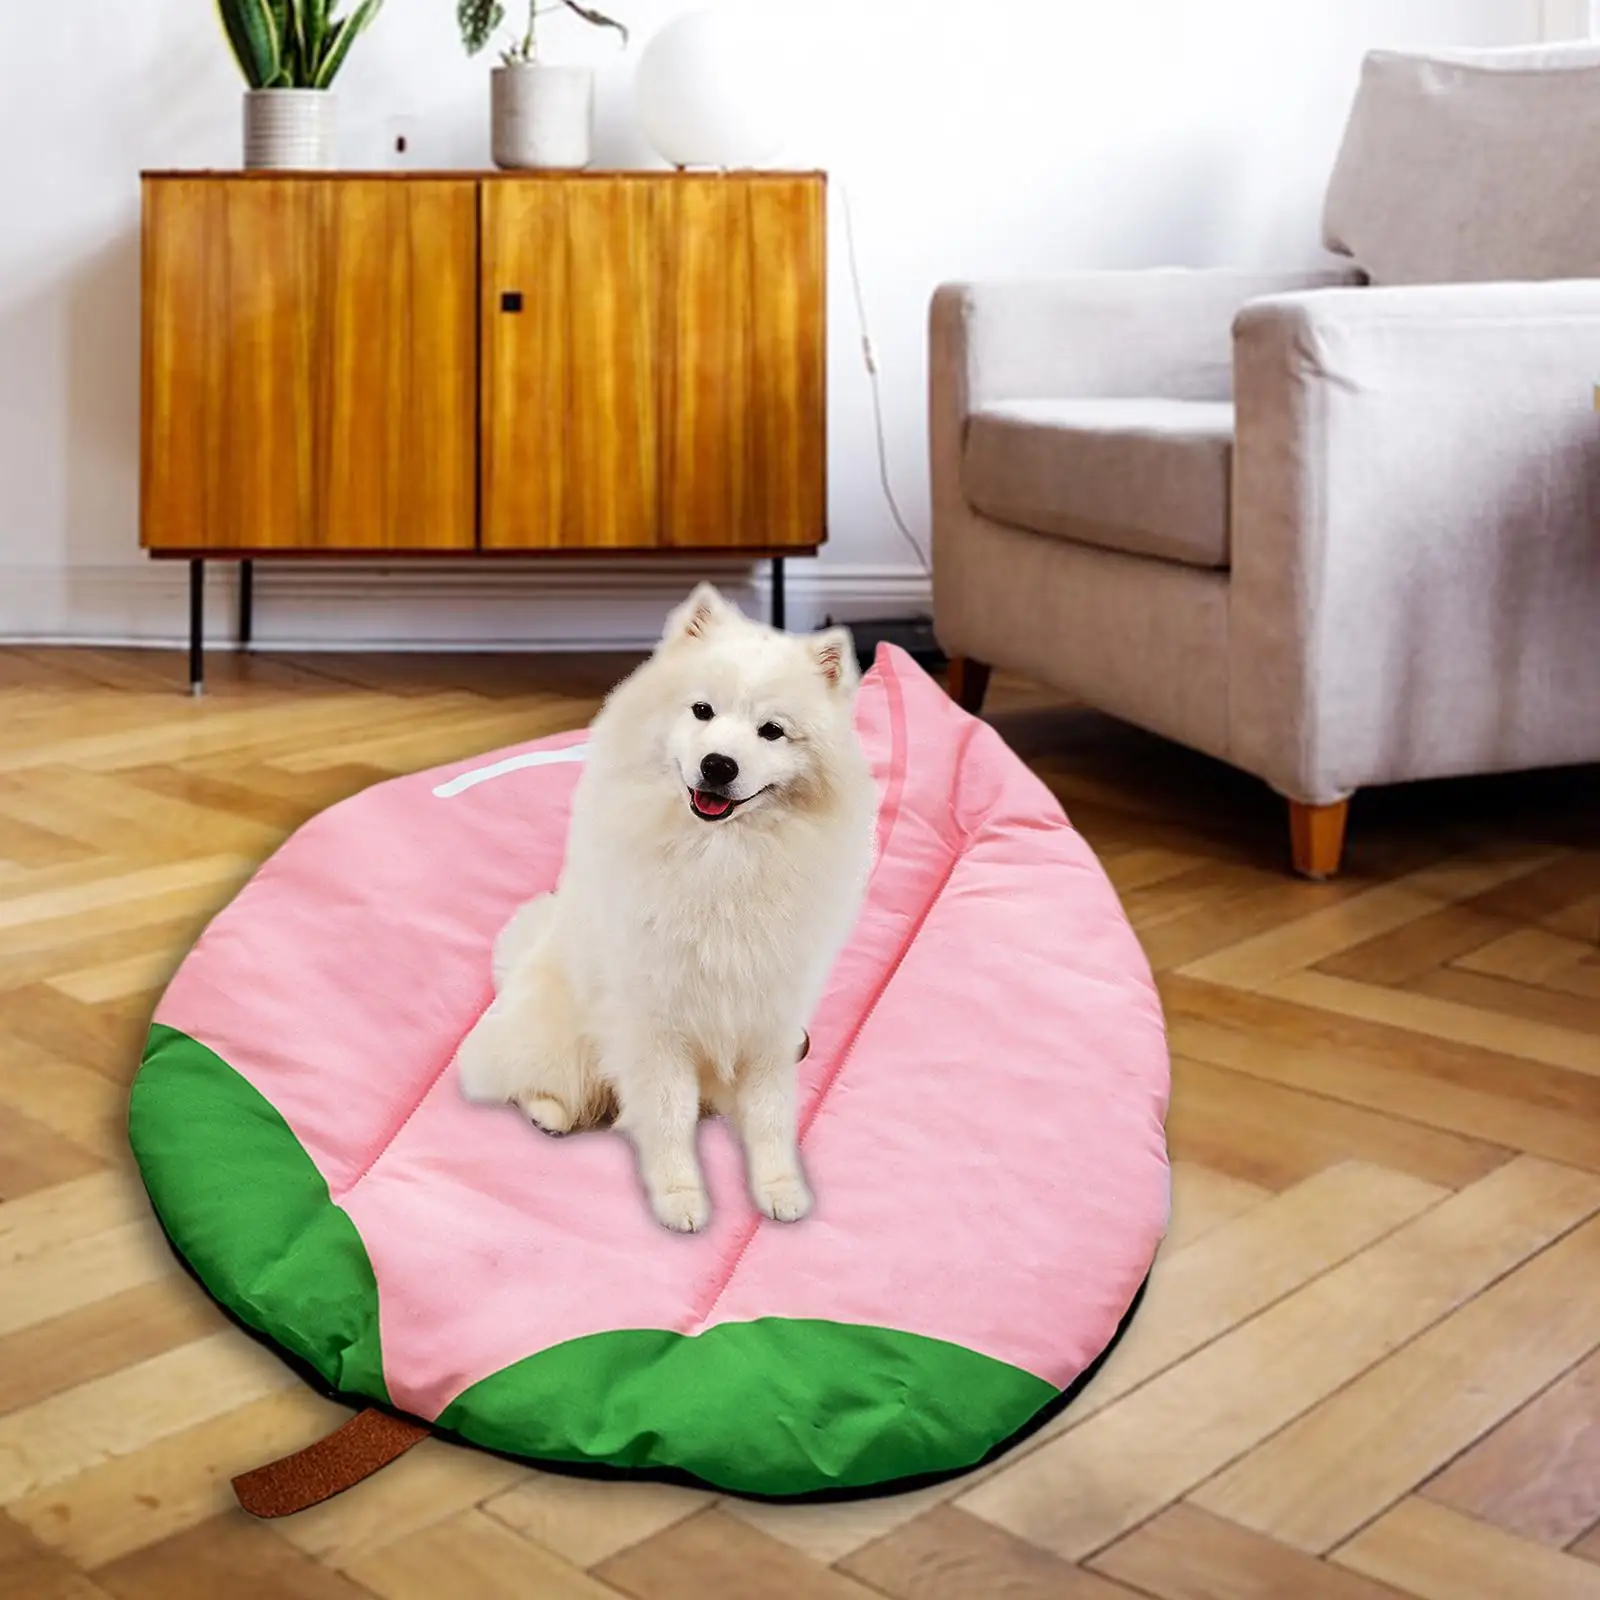 Cute Pet Blanket Dog Sleeping Pad Cat Bed Mat Crate Pad Winter Bedding Creative Kennel Cushion for Small Dogs Kitten Home Decor